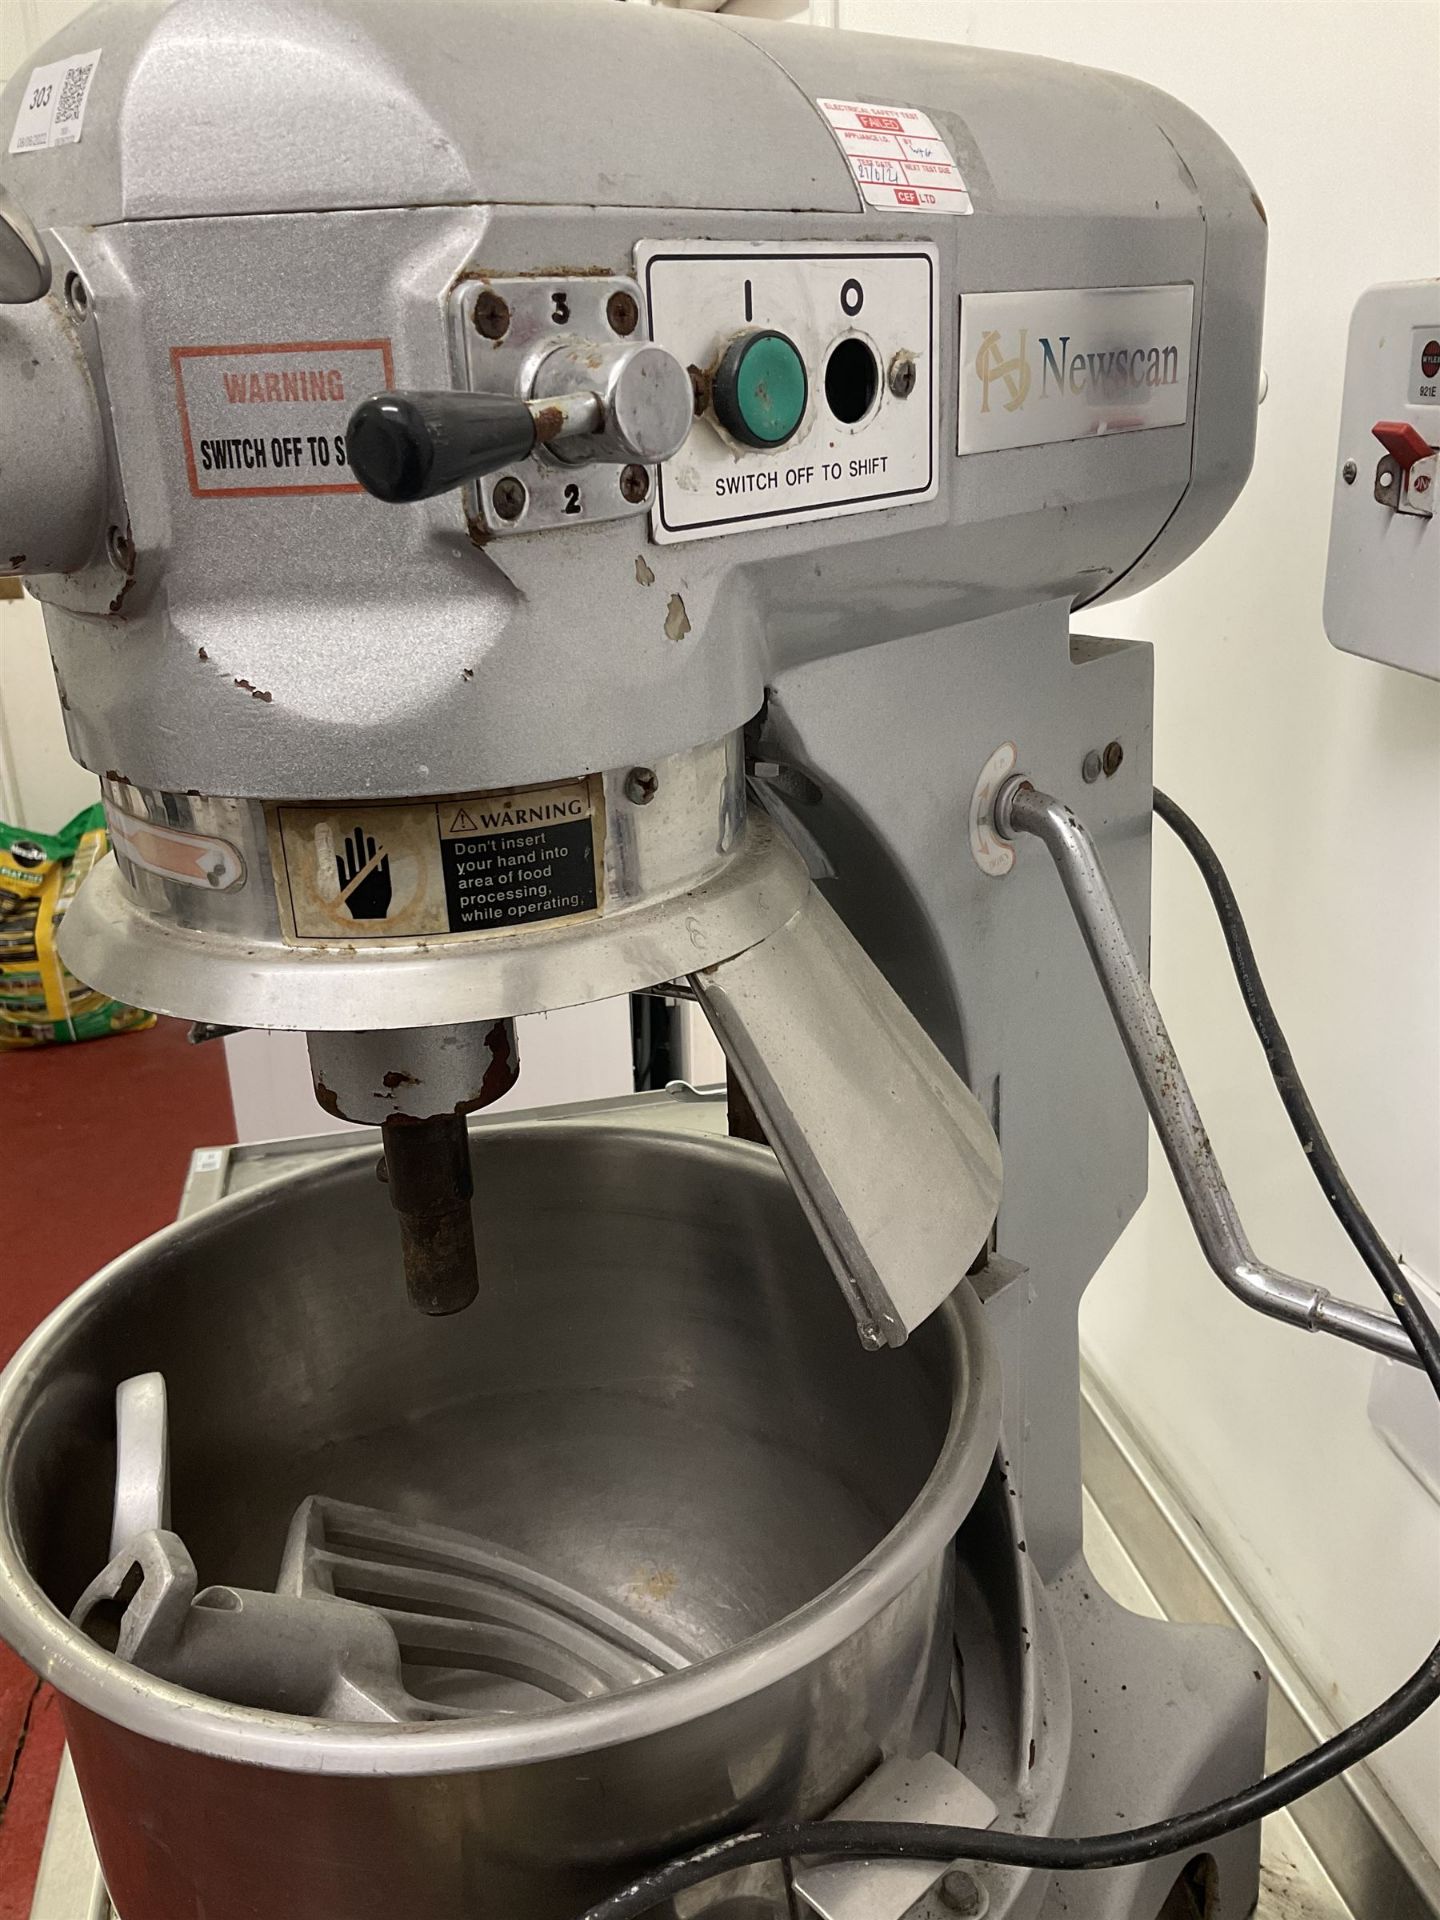 Newscan FM29 mixer with bowl and three attachments- LOT SUBJECT TO VAT ON THE HAMMER PRICE - To be c - Image 6 of 6